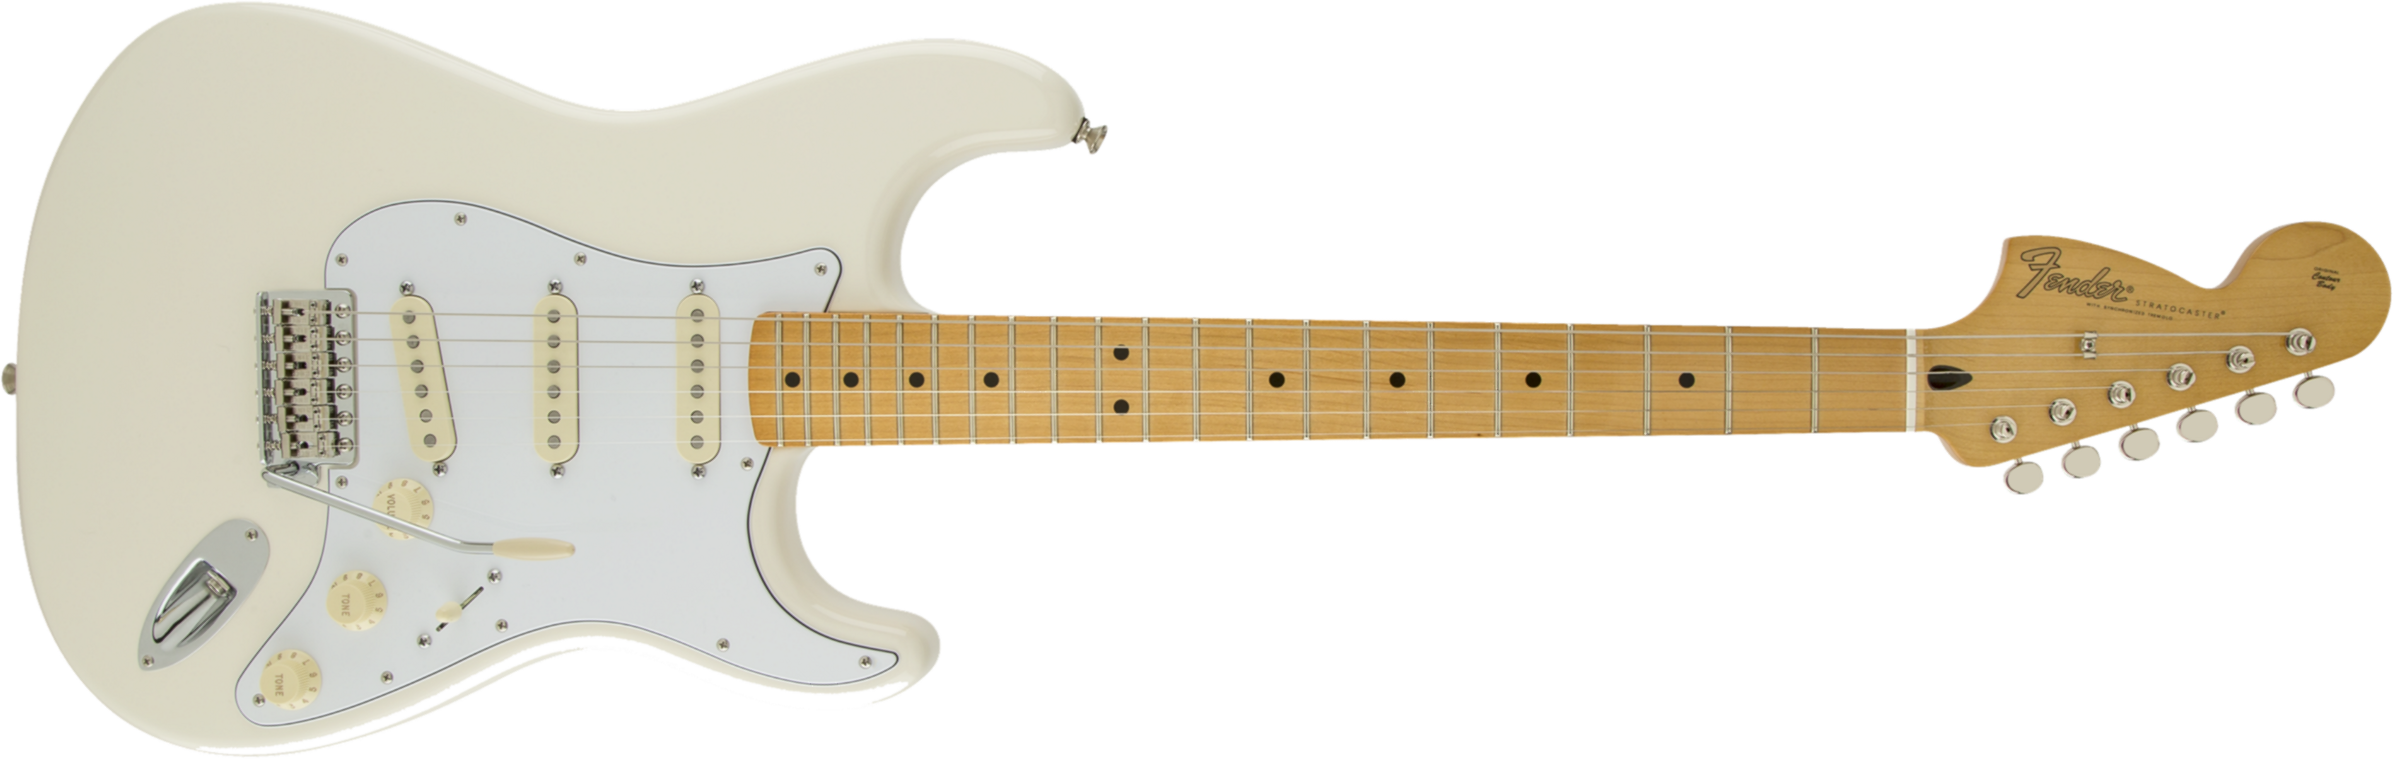 Fender Jimi Hendrix Stratocaster (mex, Mn) - Olympic White - Str shape electric guitar - Main picture